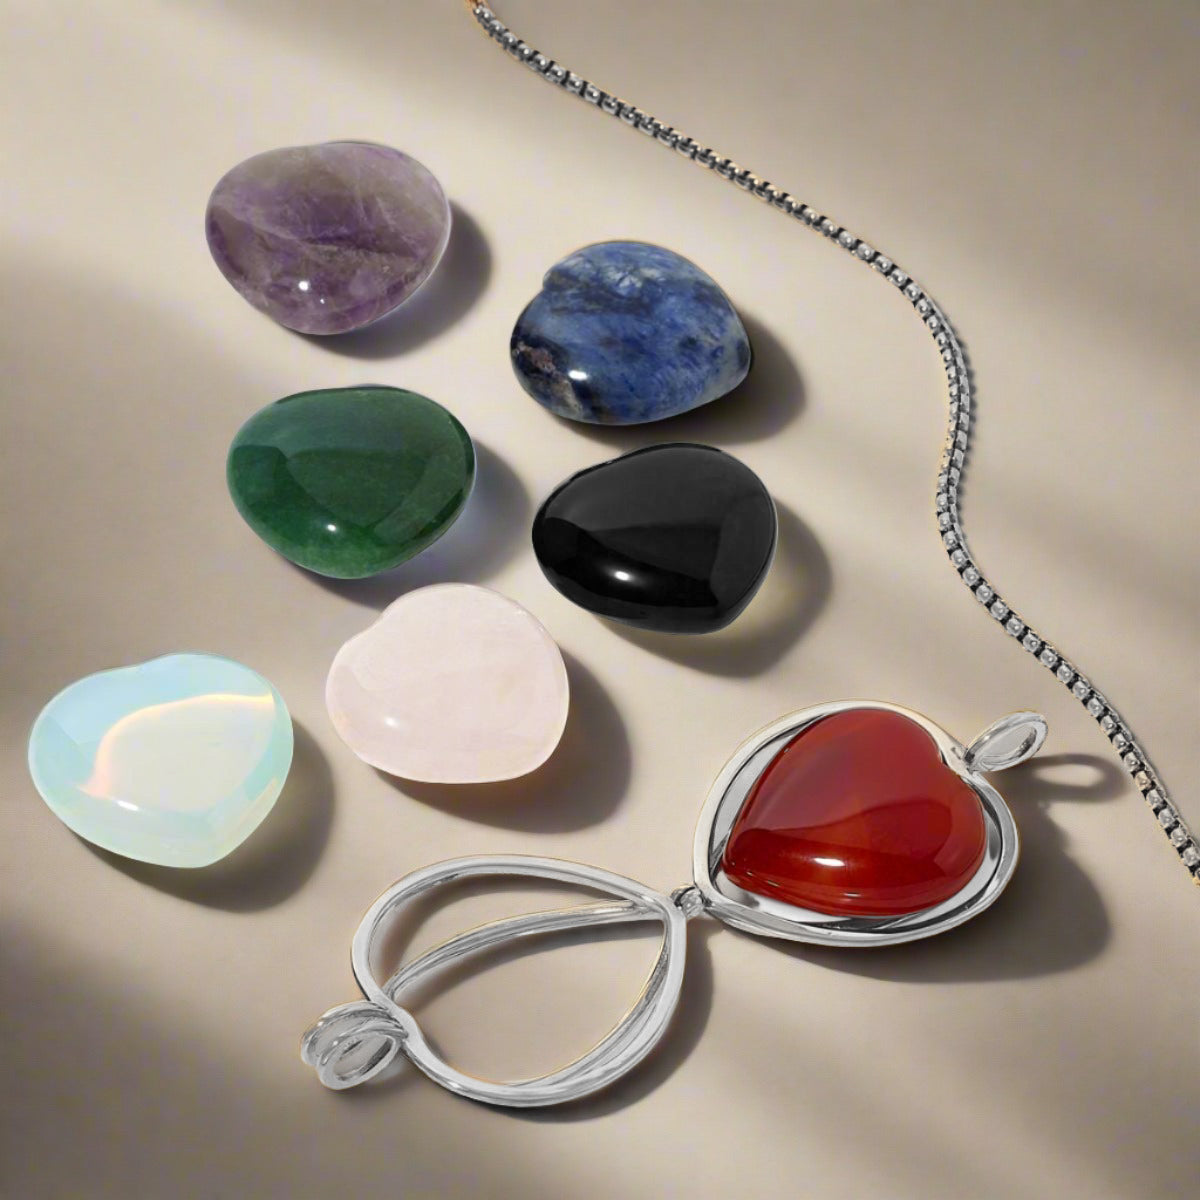 Stainless Steel Convertible Heart Locket with Chakra Gemstones | Adjustable Bolo Chain | 30"